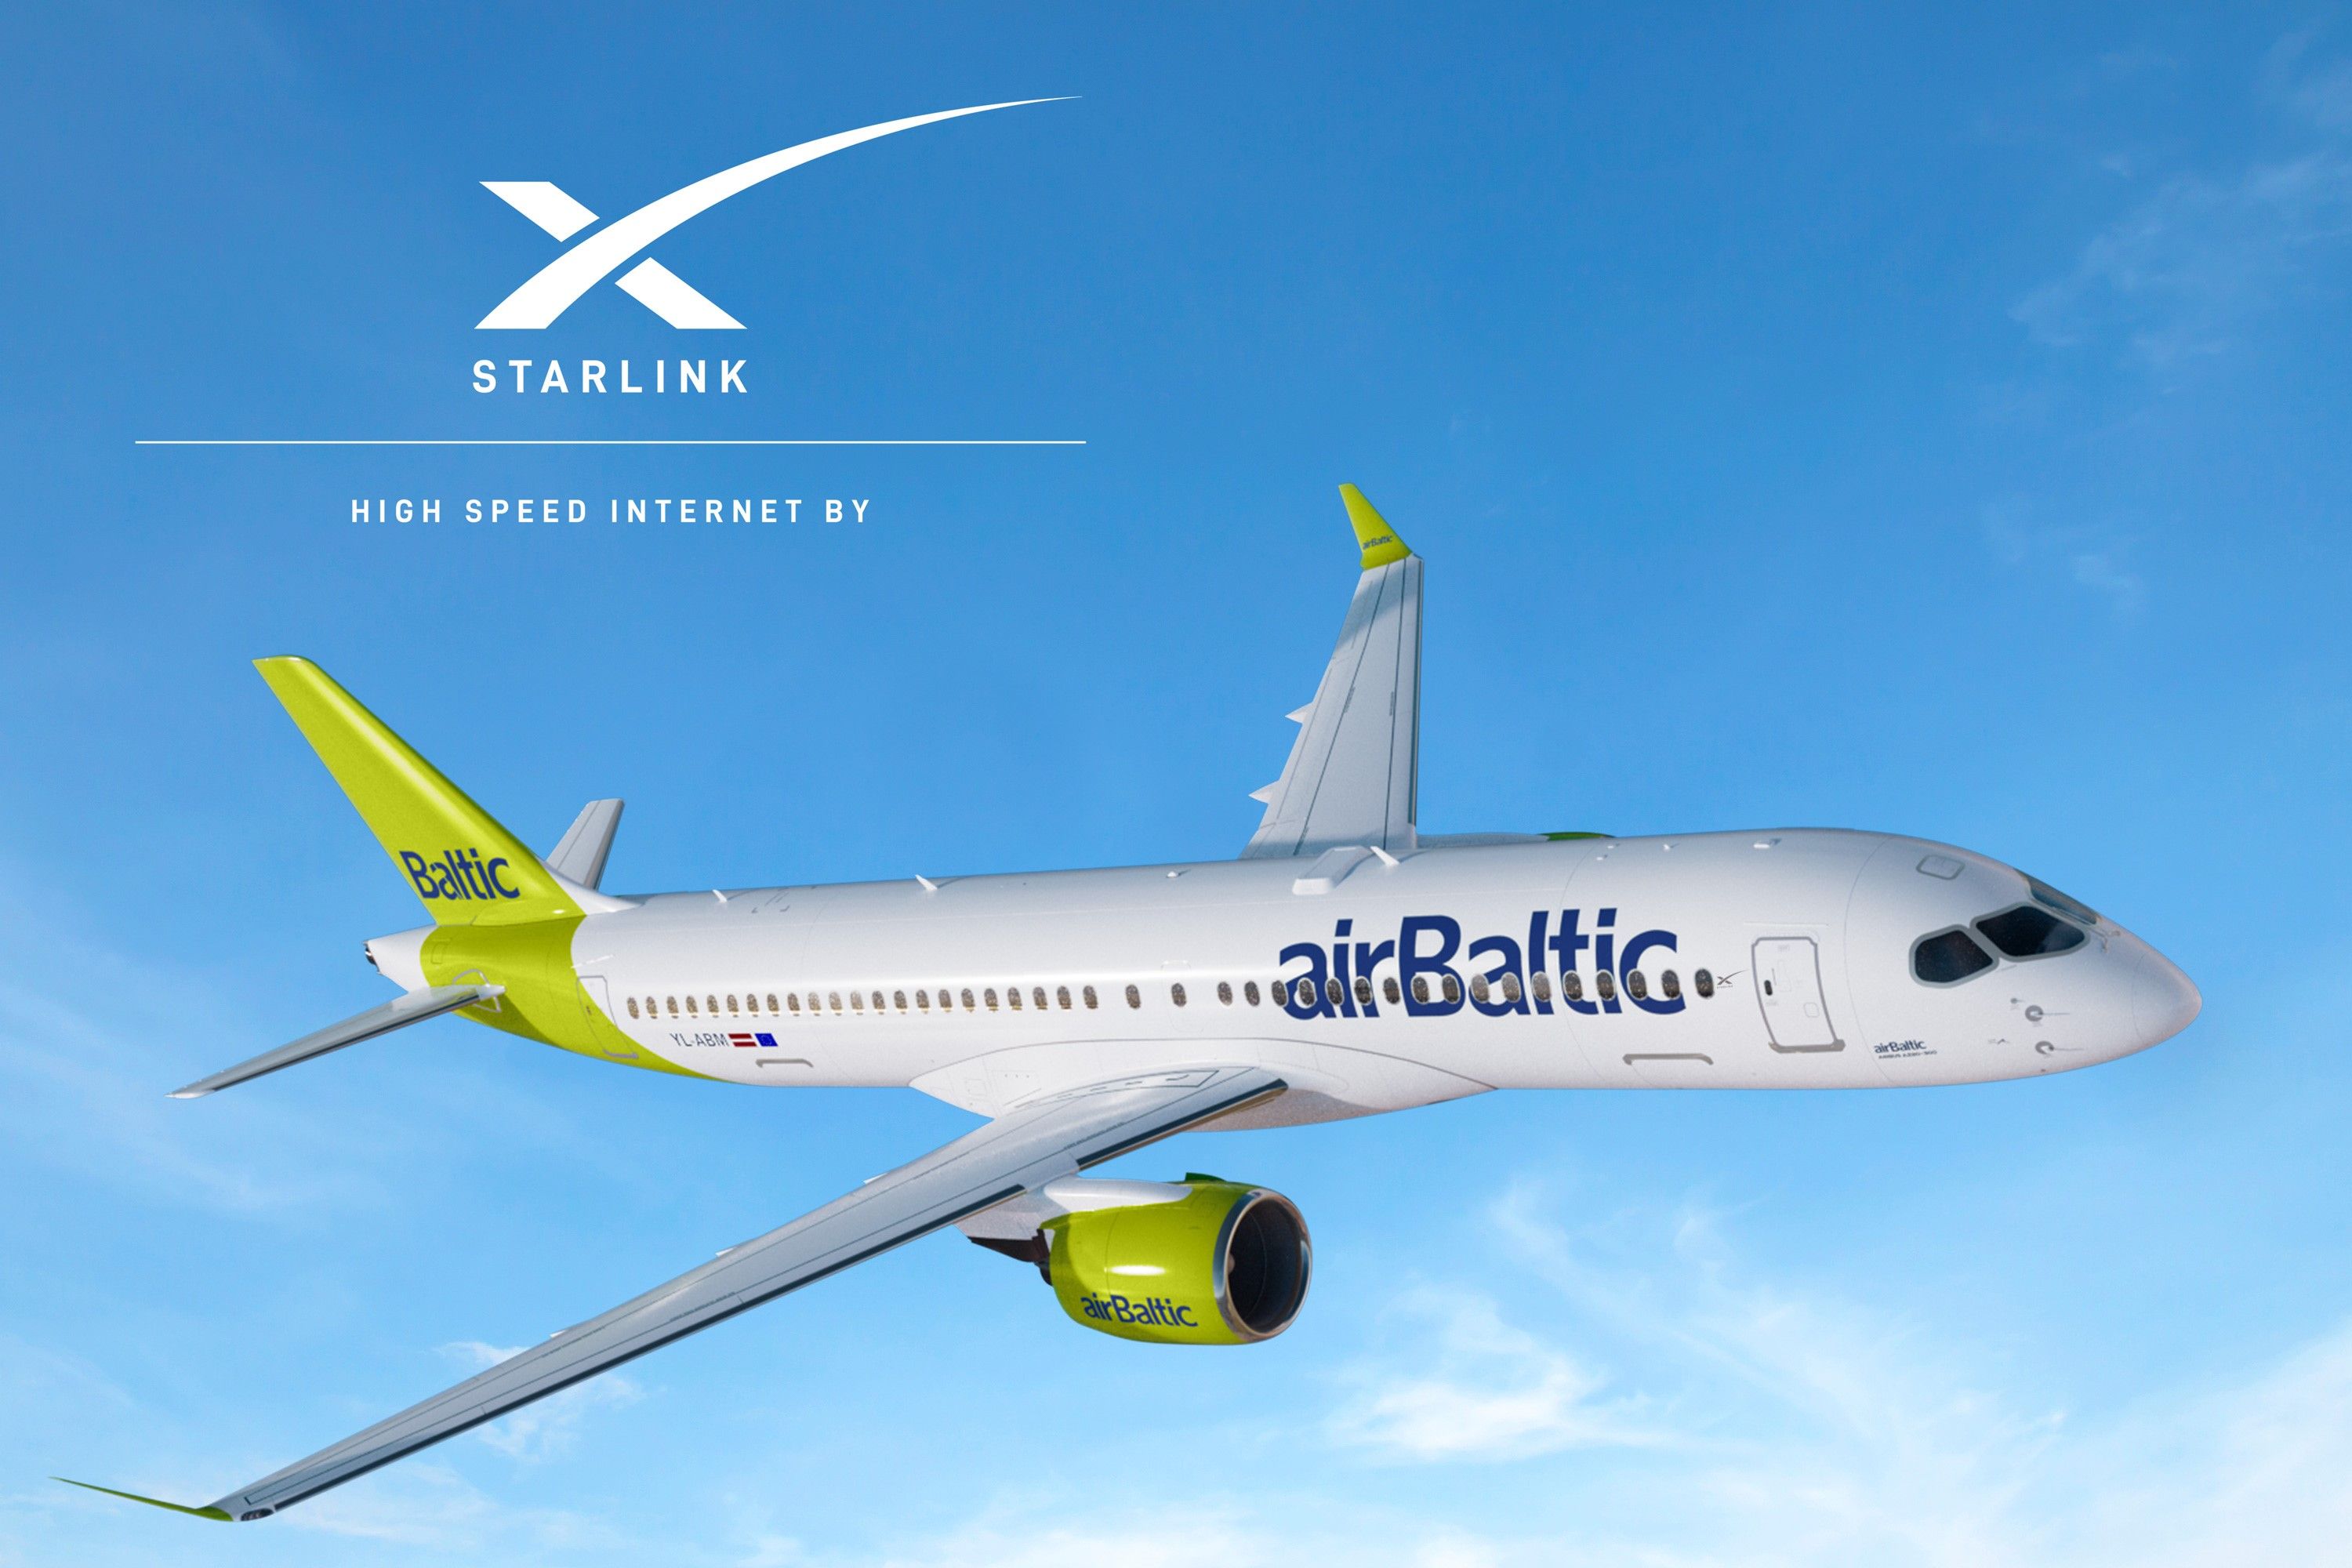 An airBaltic aircraft flying in the sky, beneath a Starlink logo.